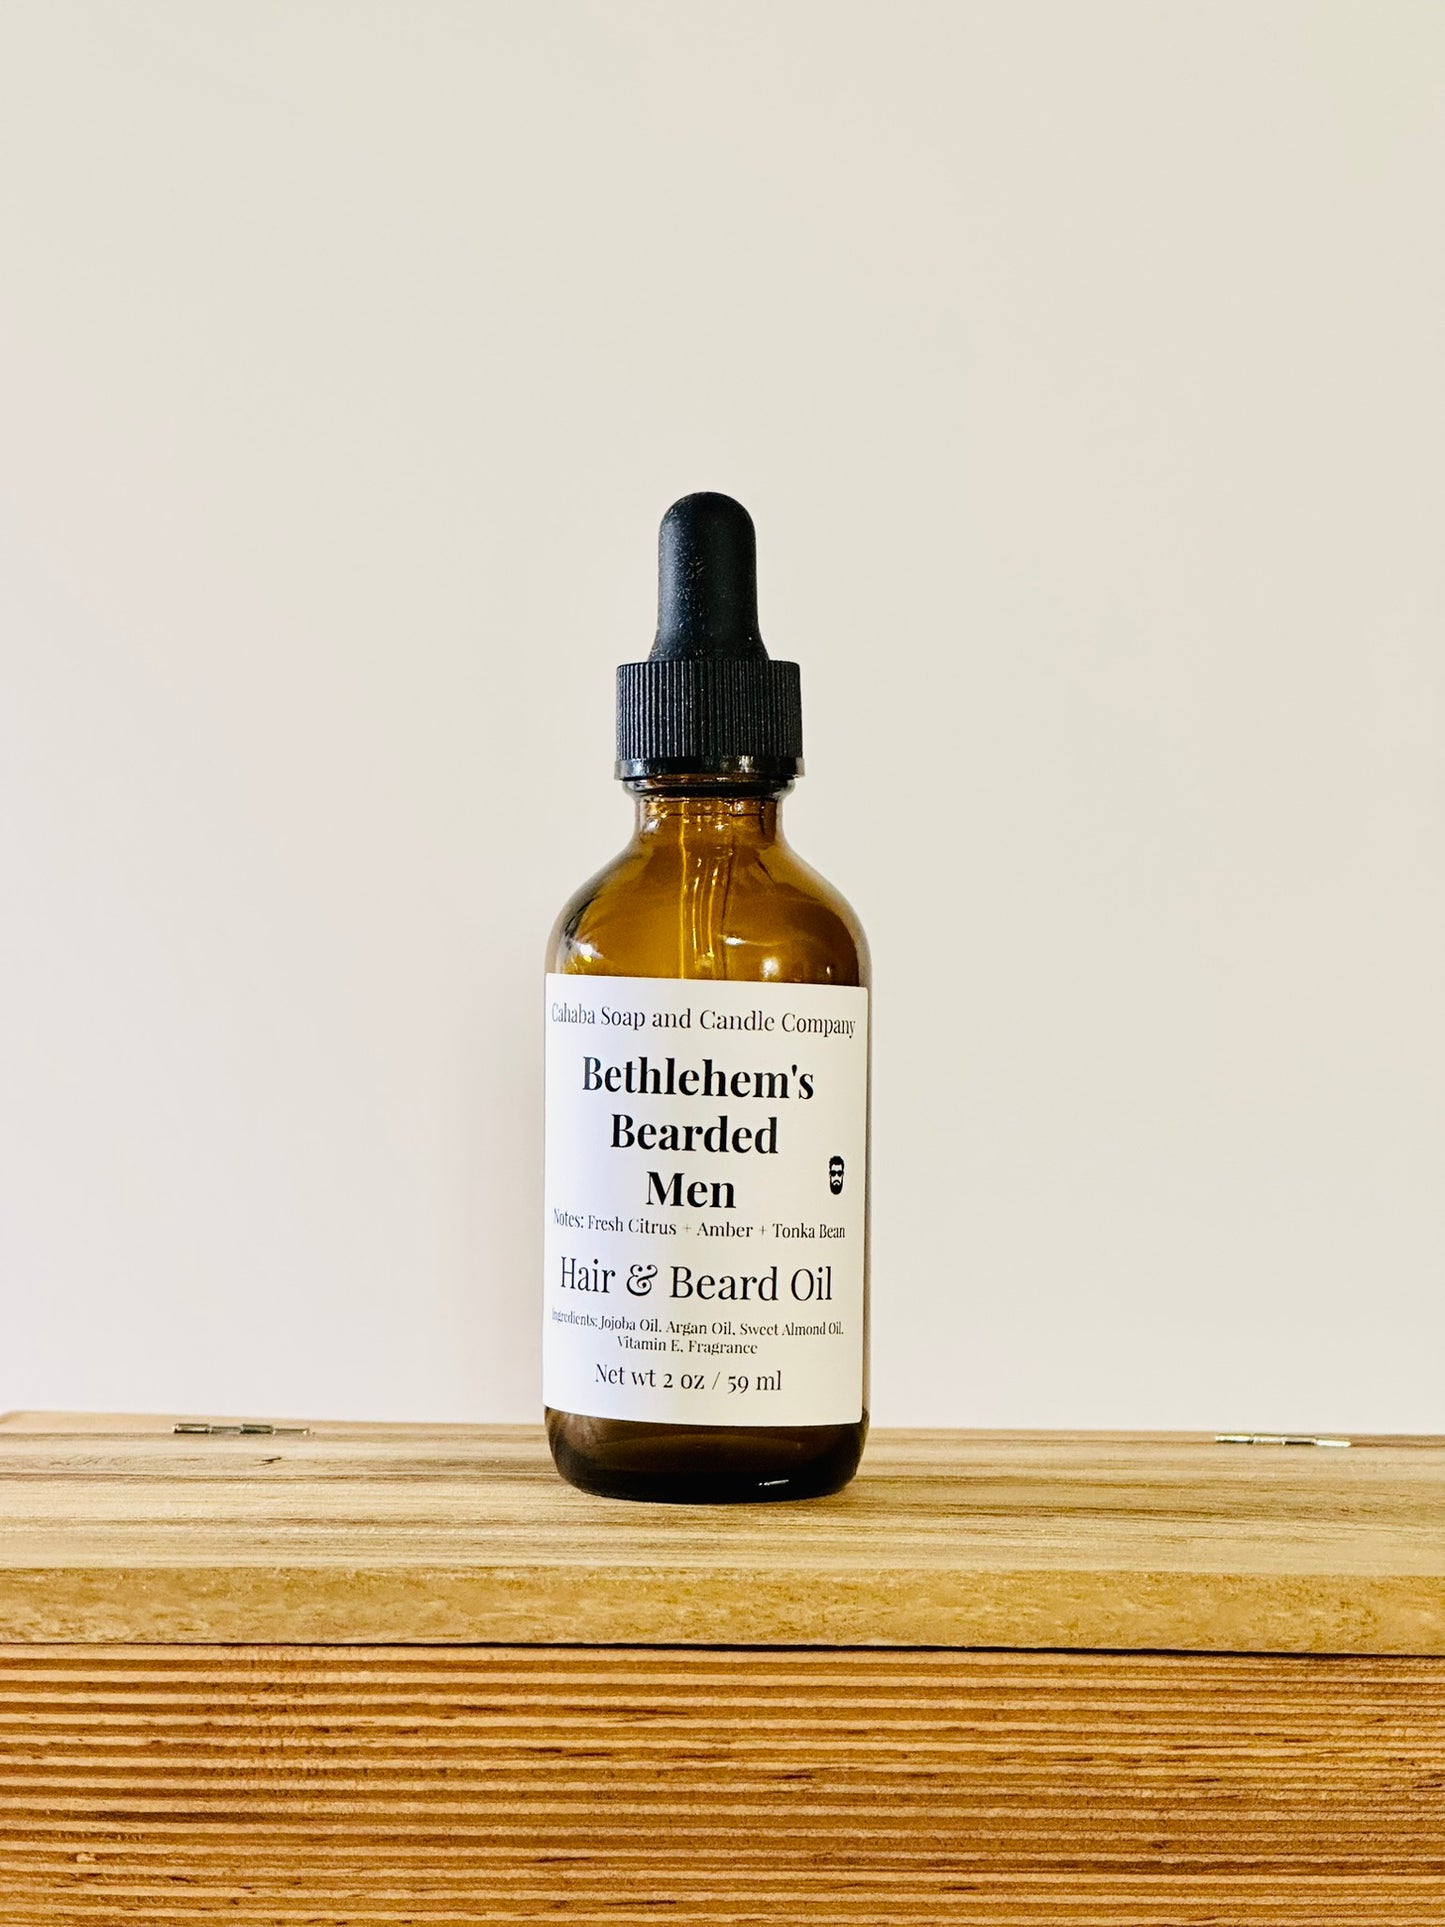 Hair and Beard Oil - Cahaba Soap and Candle Company